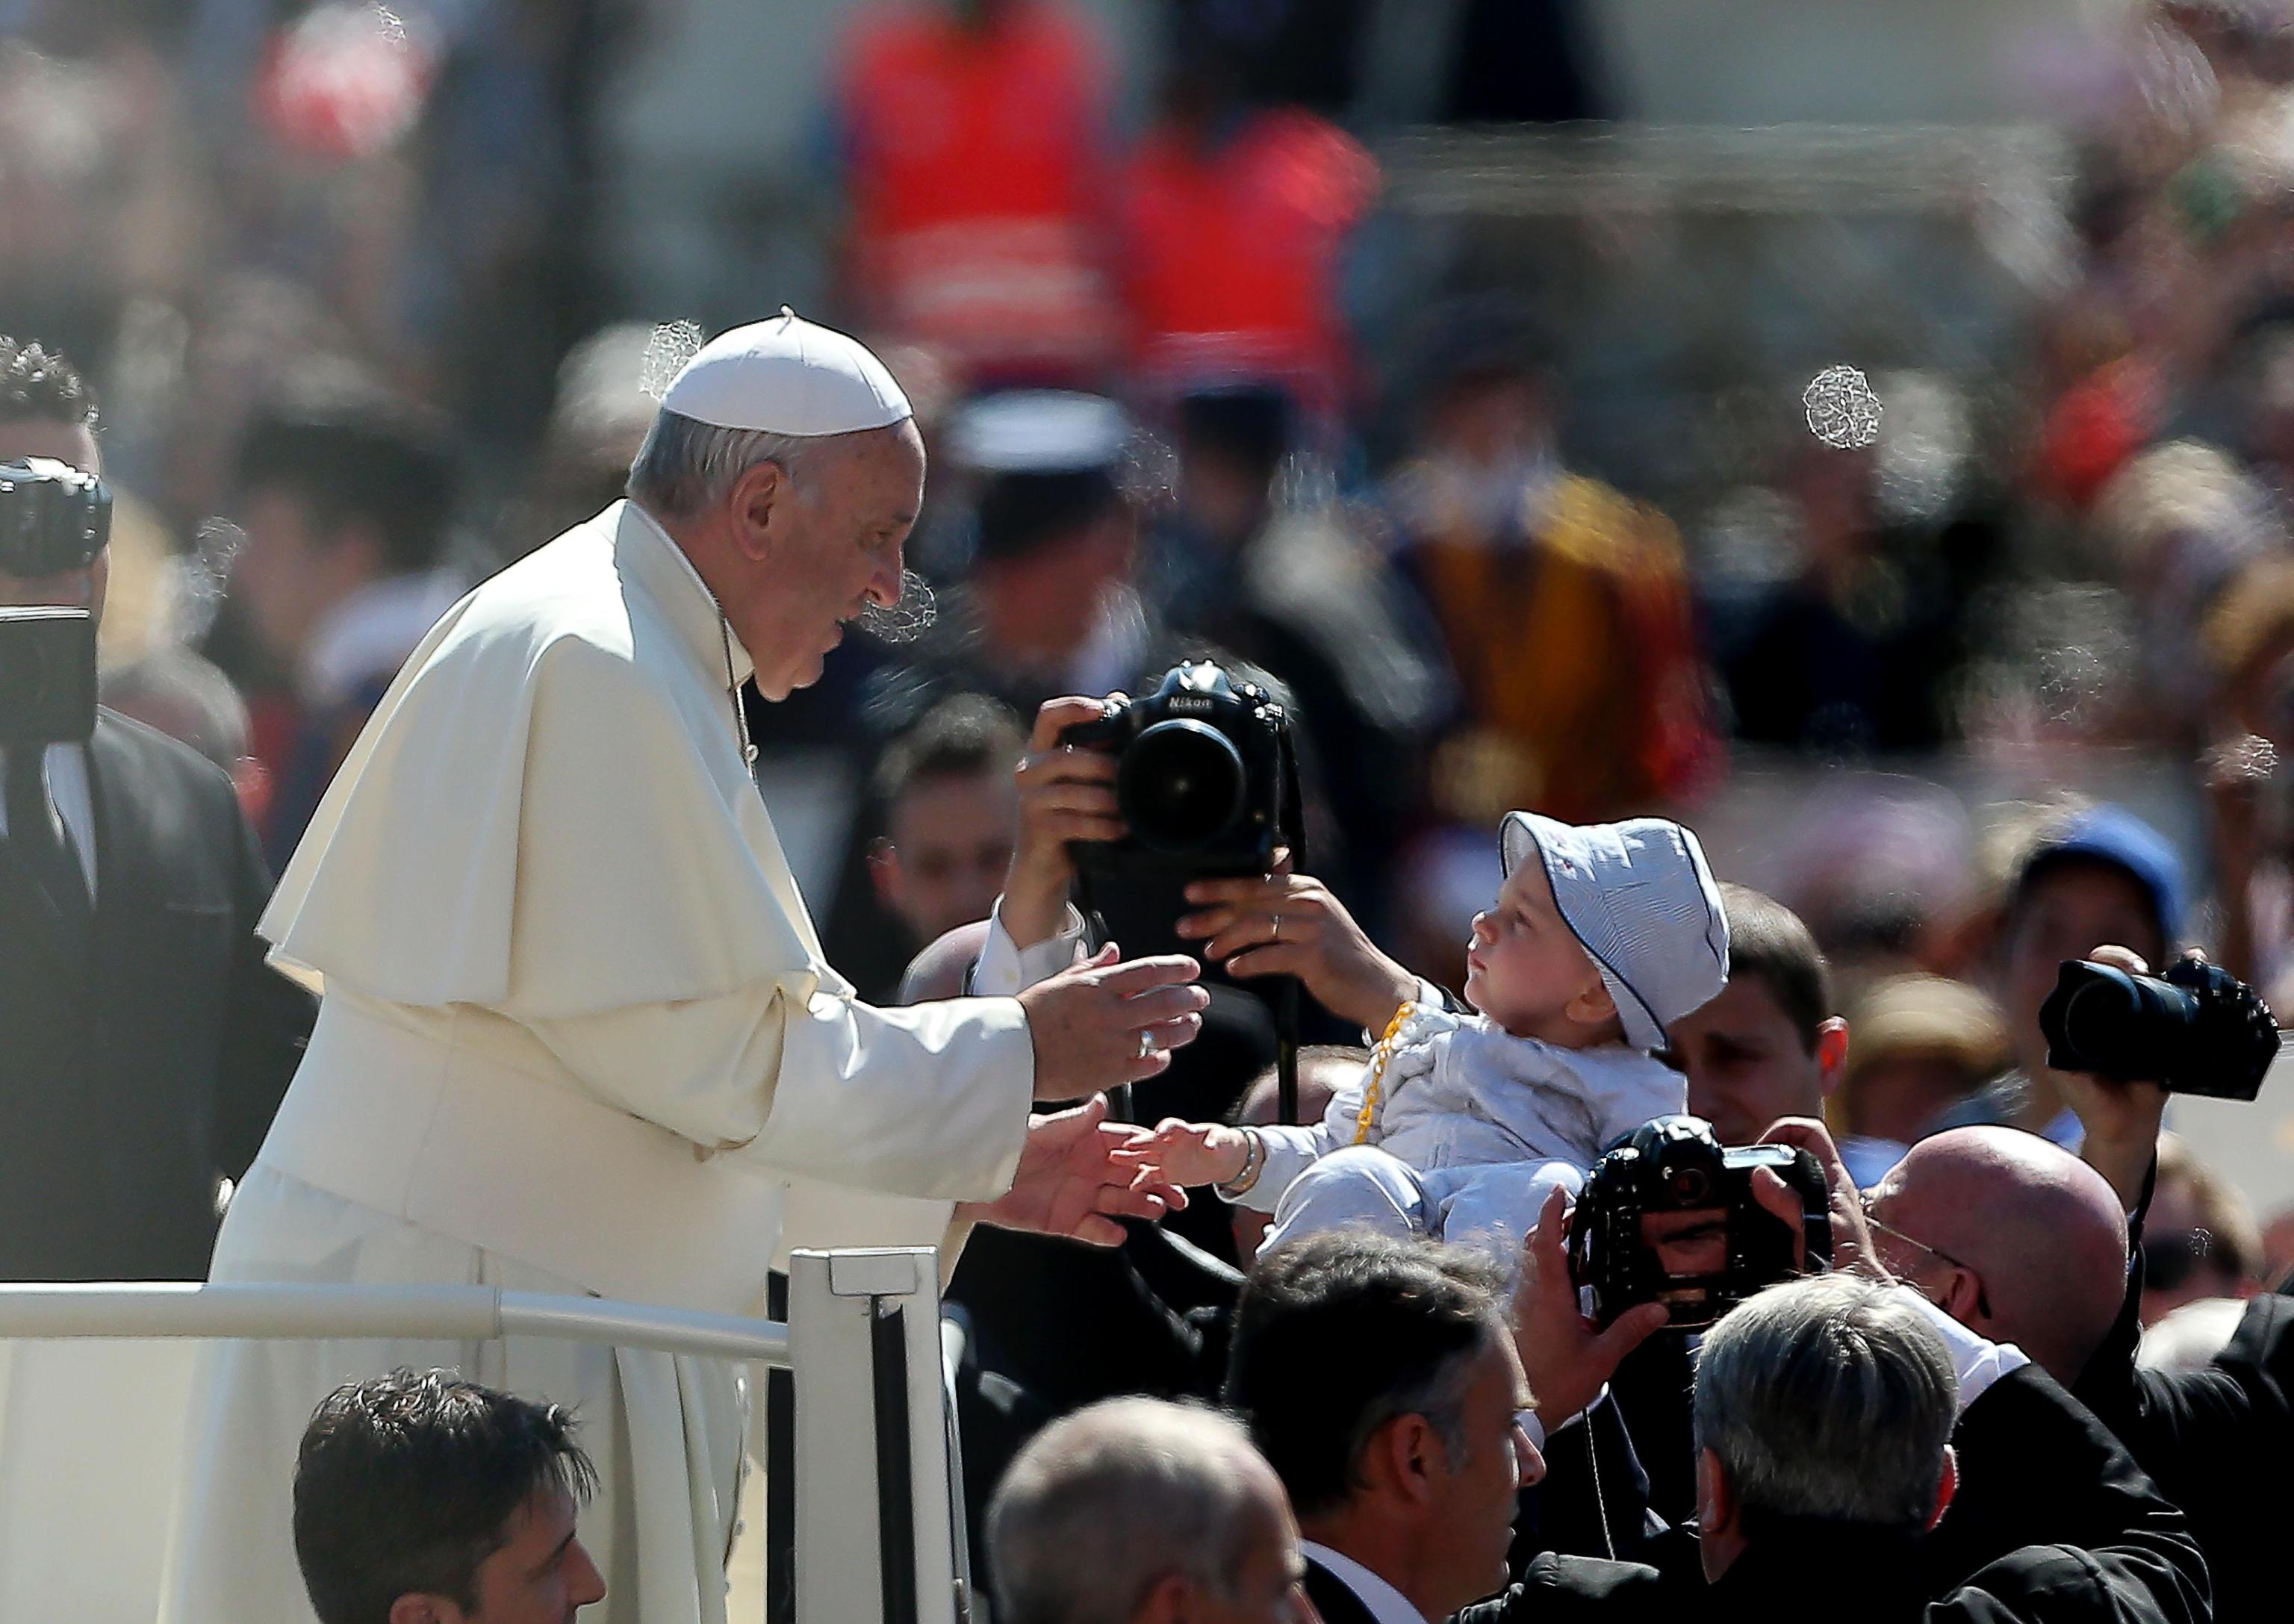 Pope Francis during the General Audience in Saint Peter's Square on Wednesday 27th of May